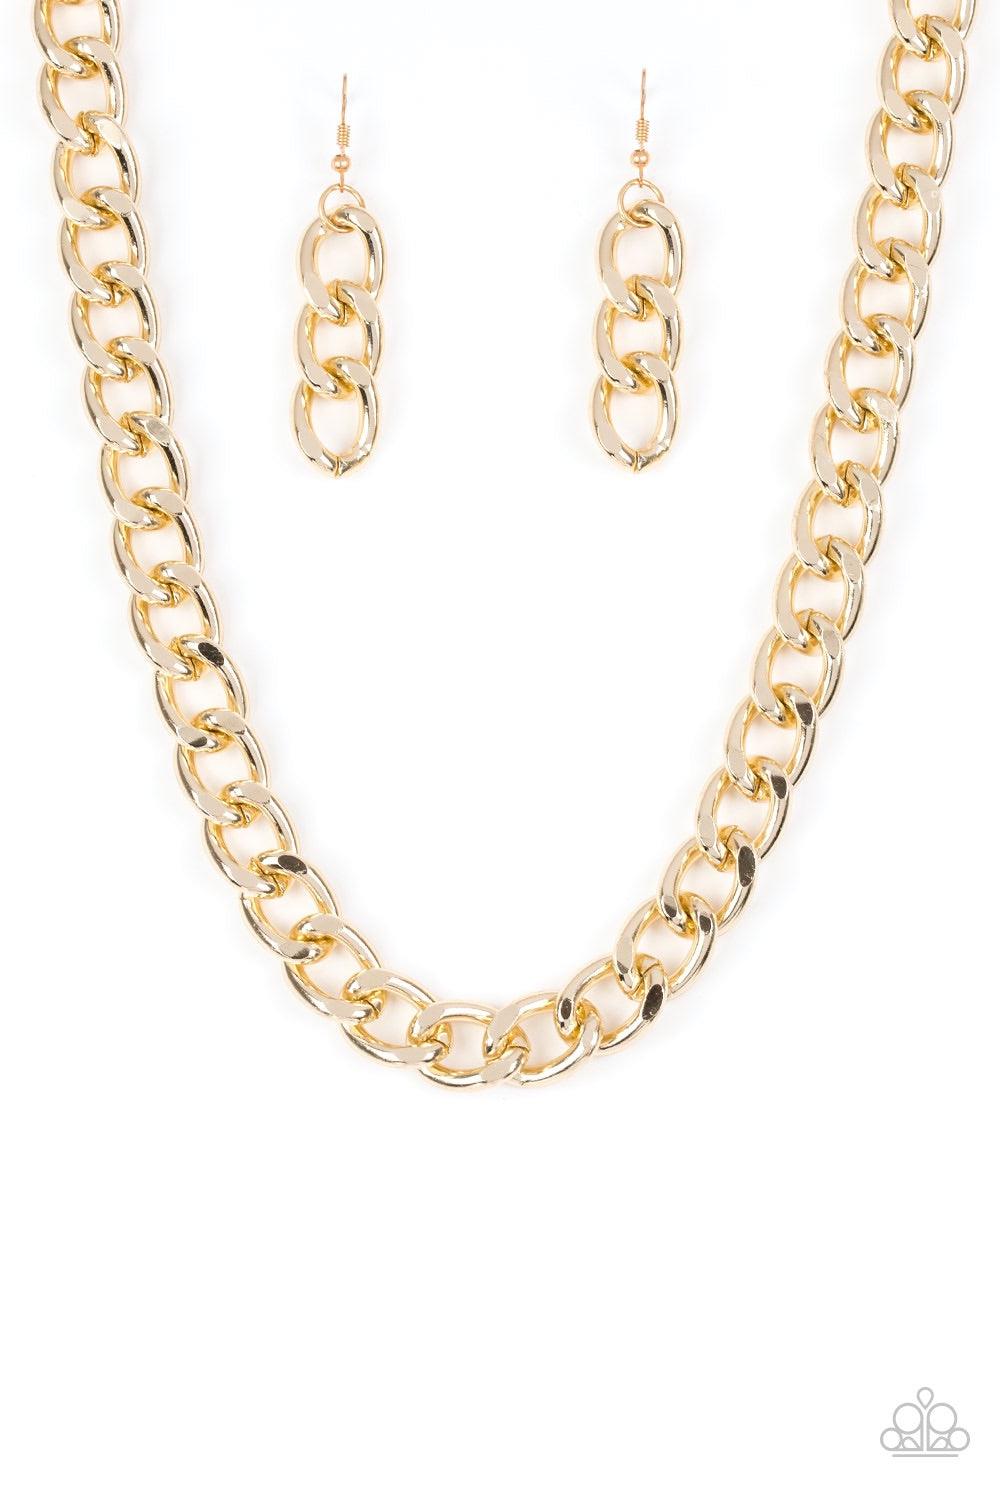 Paparazzi Accessories Heavyweight Champion - Gold Brushed in a high-sheen shimmer, a bold gold chain drapes below the collar in an edgy industrial fashion. Features an adjustable clasp closure. Jewelry